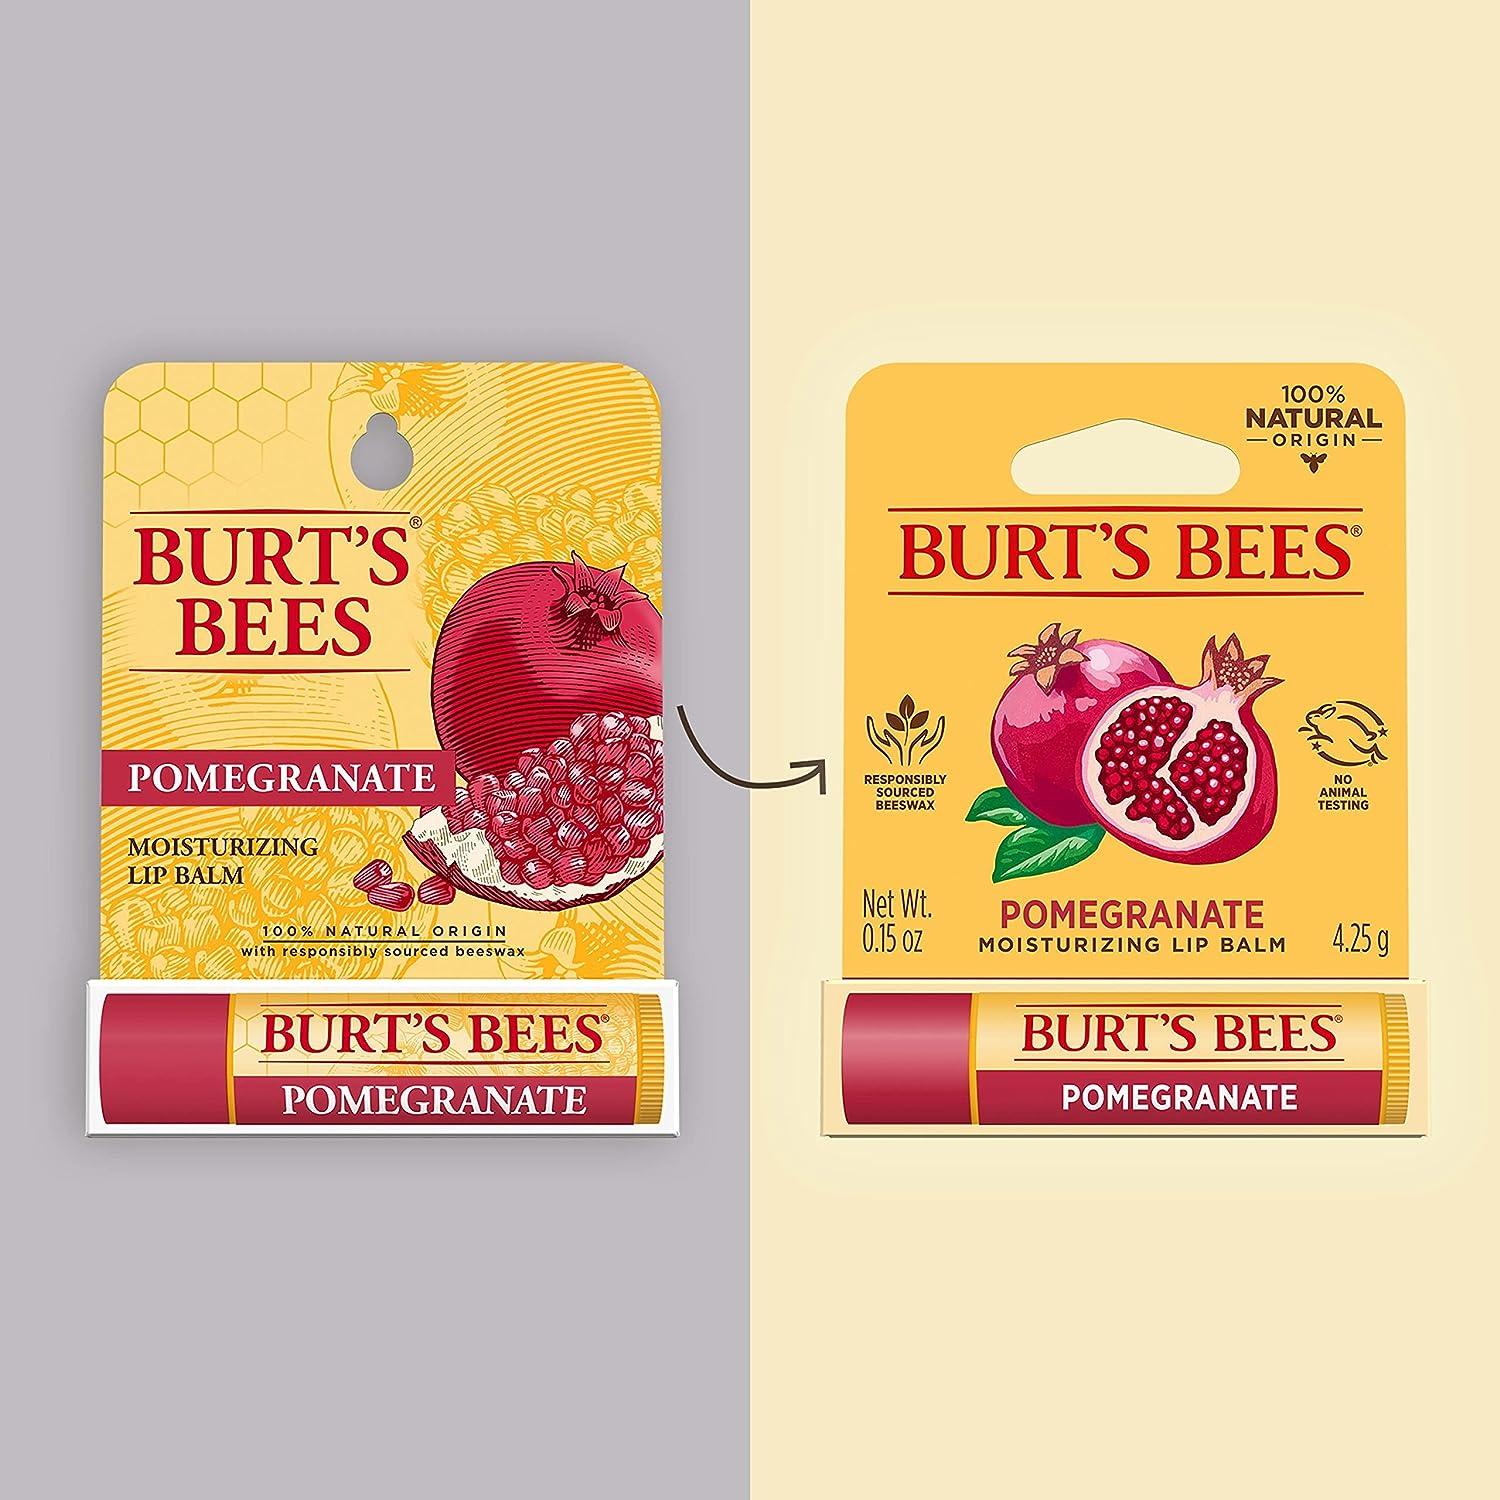 Burt's Bees Lip Balm, Moisturizing Lip Care, for All Day Hydration, 100%  Natural, Pomegranate with Beeswax & Fruit Extracts (4 Pack)